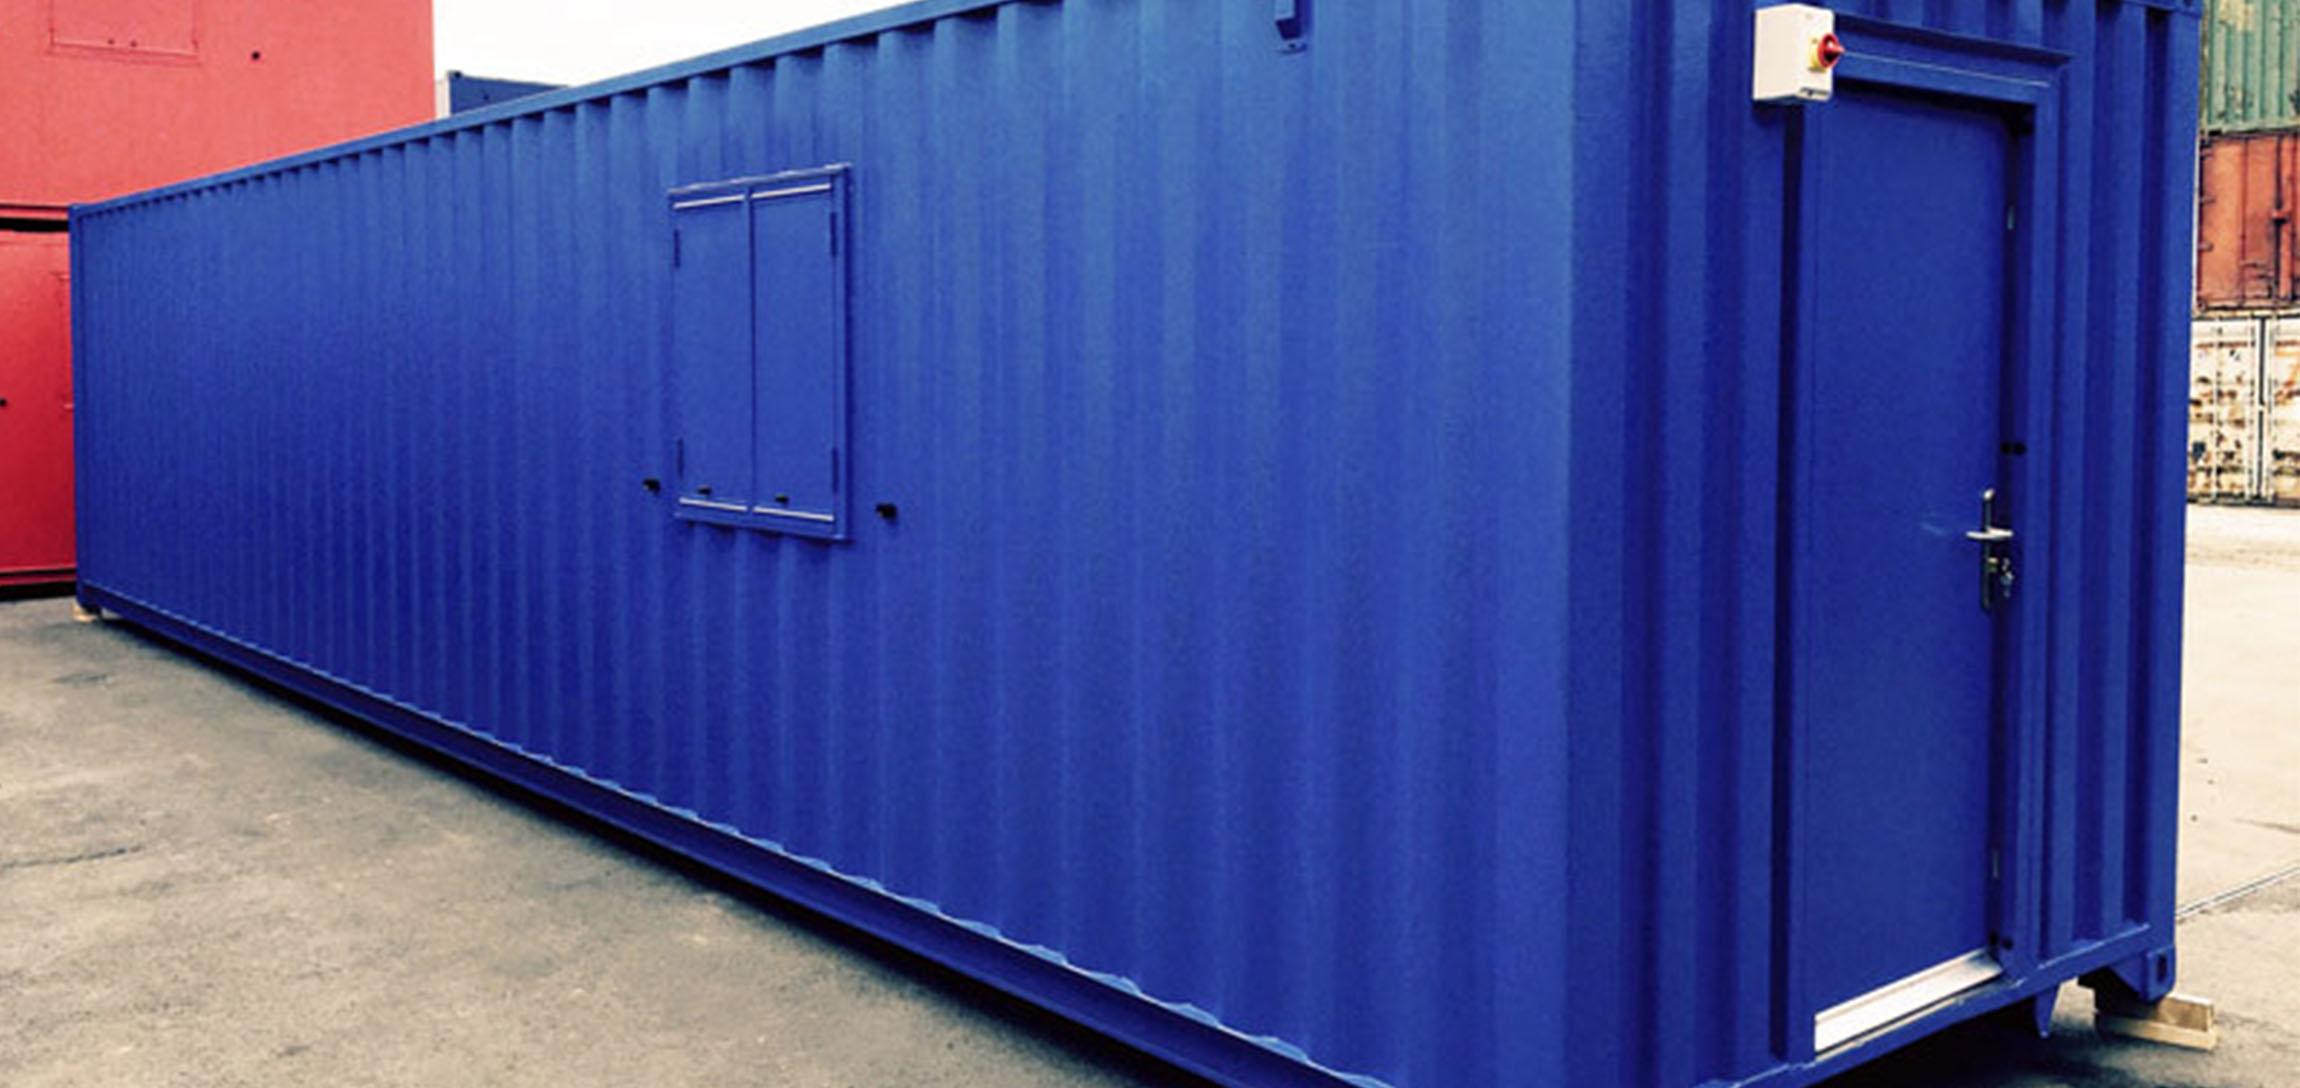 Providers of Shipping Container Office Solutions UK